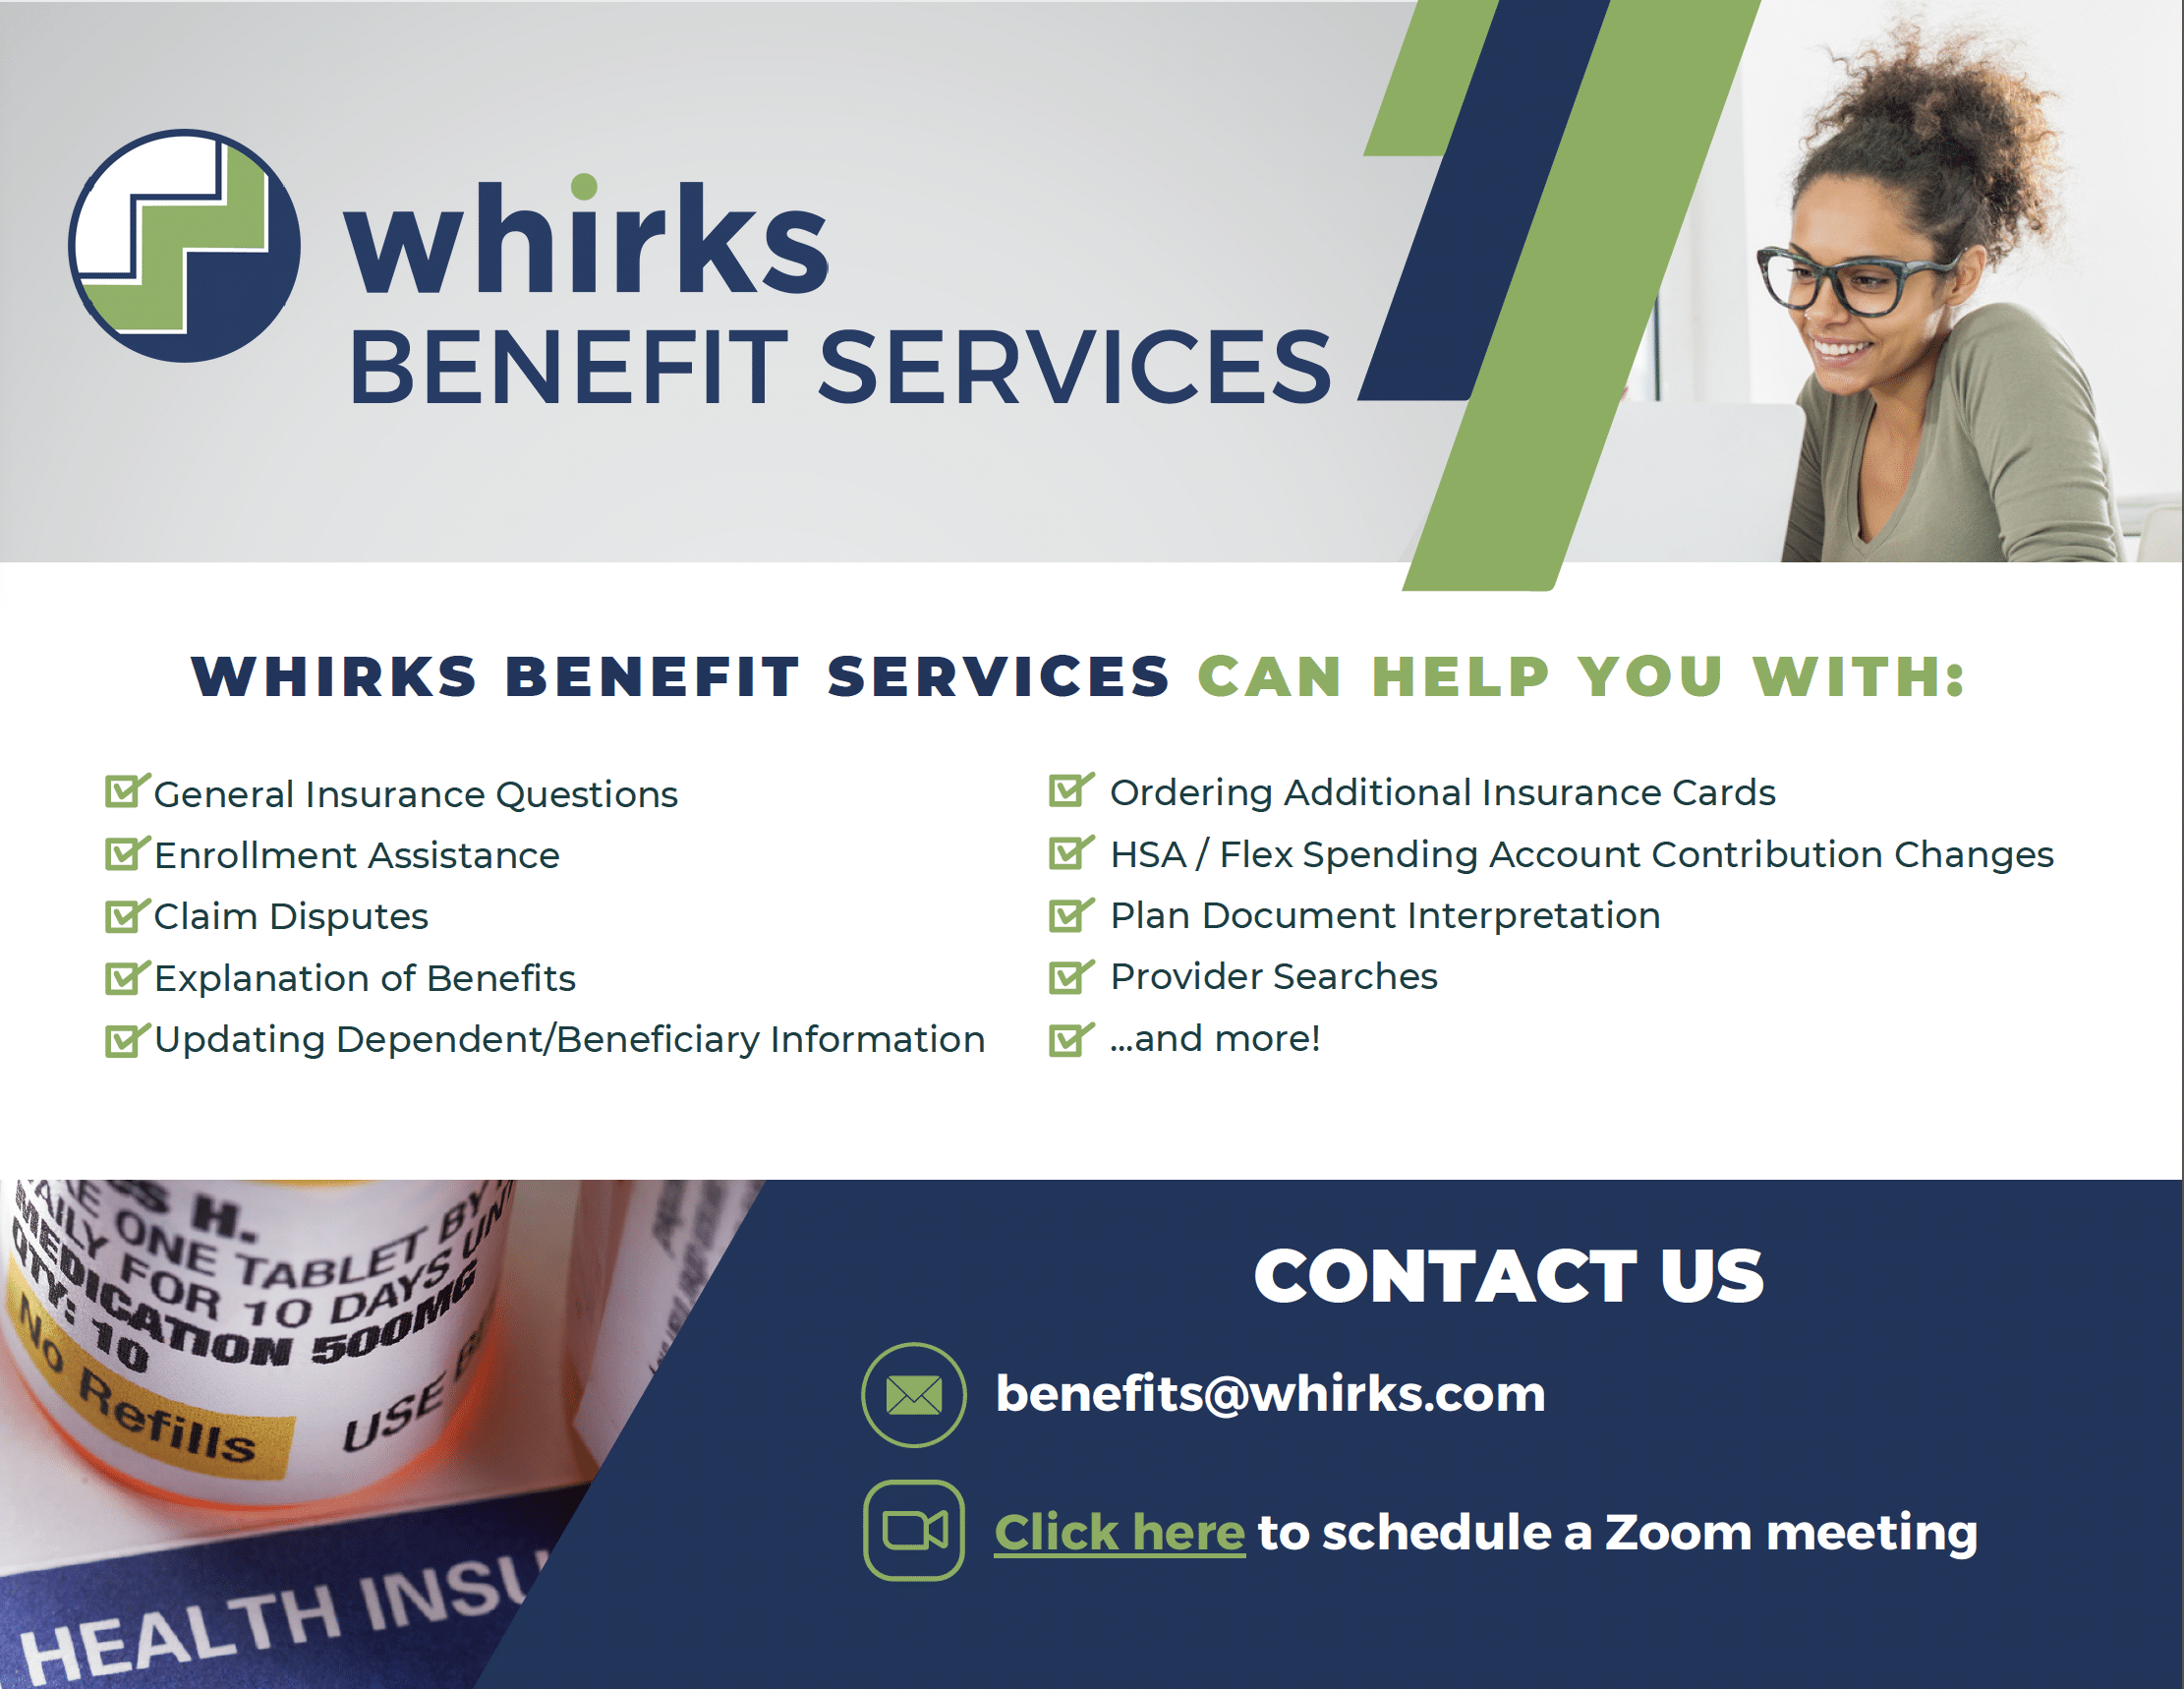 Whirks Benefits Services